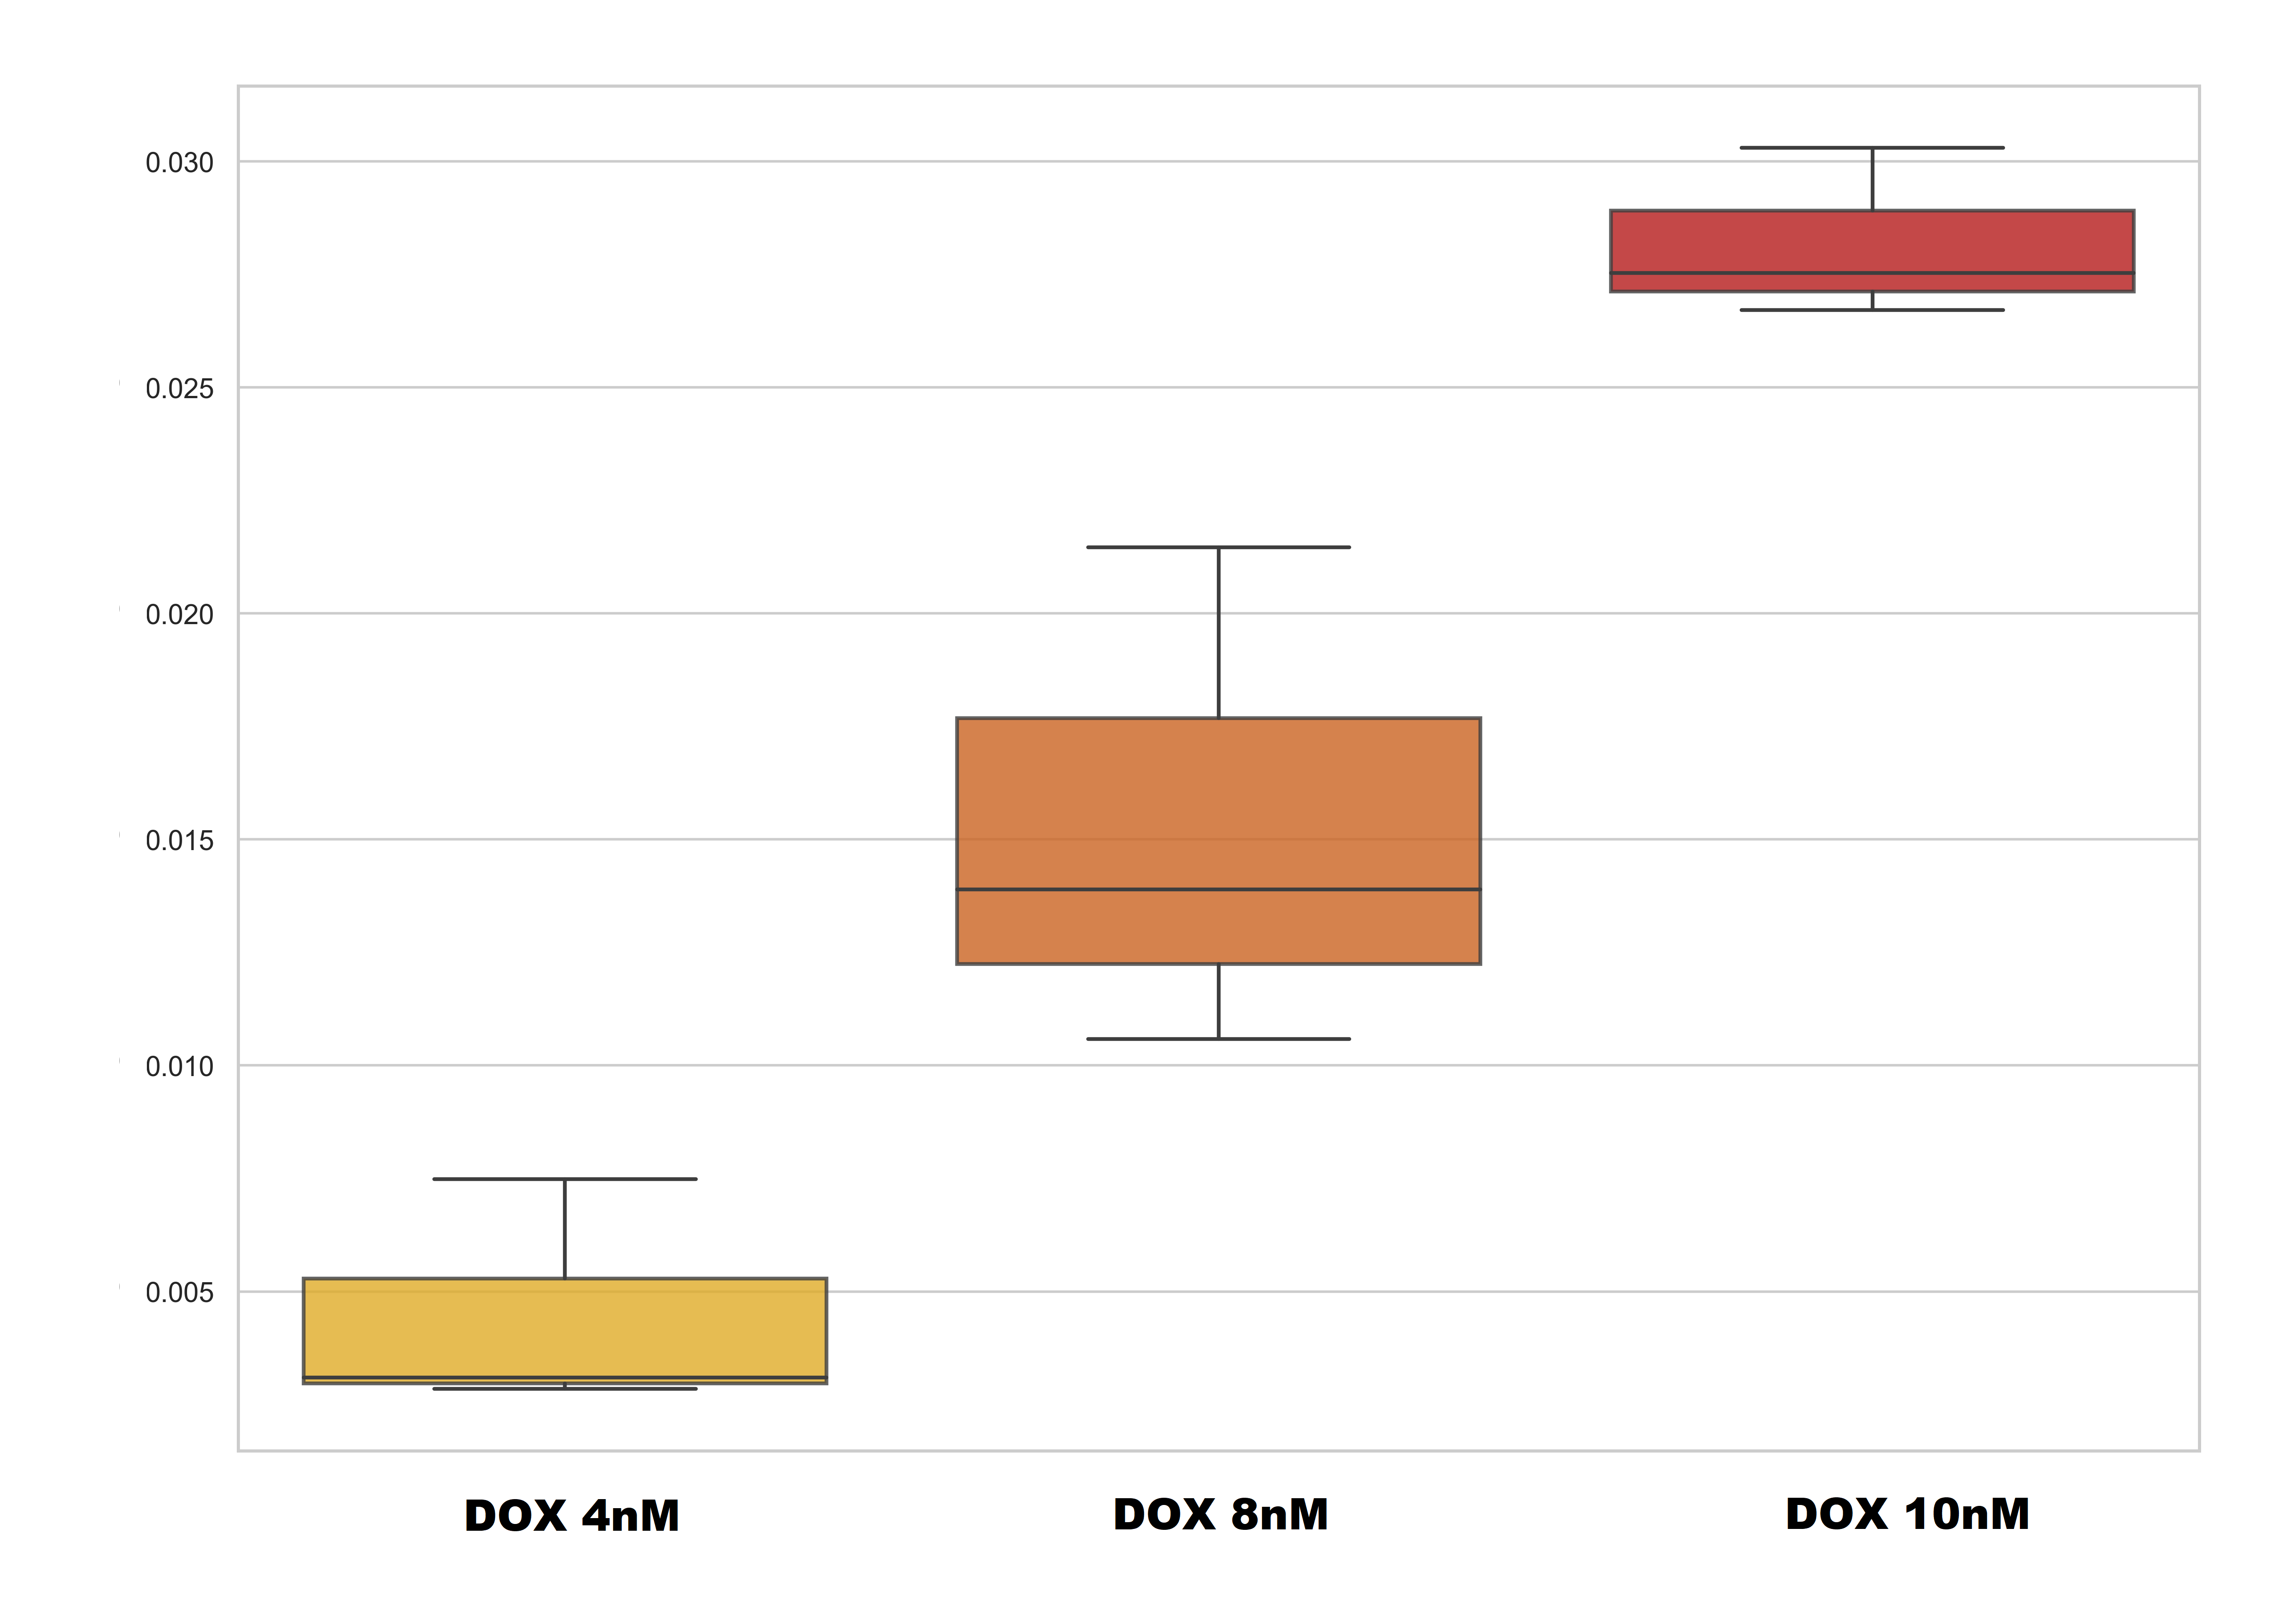 Boxplots of relative expression of AKR1B10 mRNA levels among different experimental groups of cells